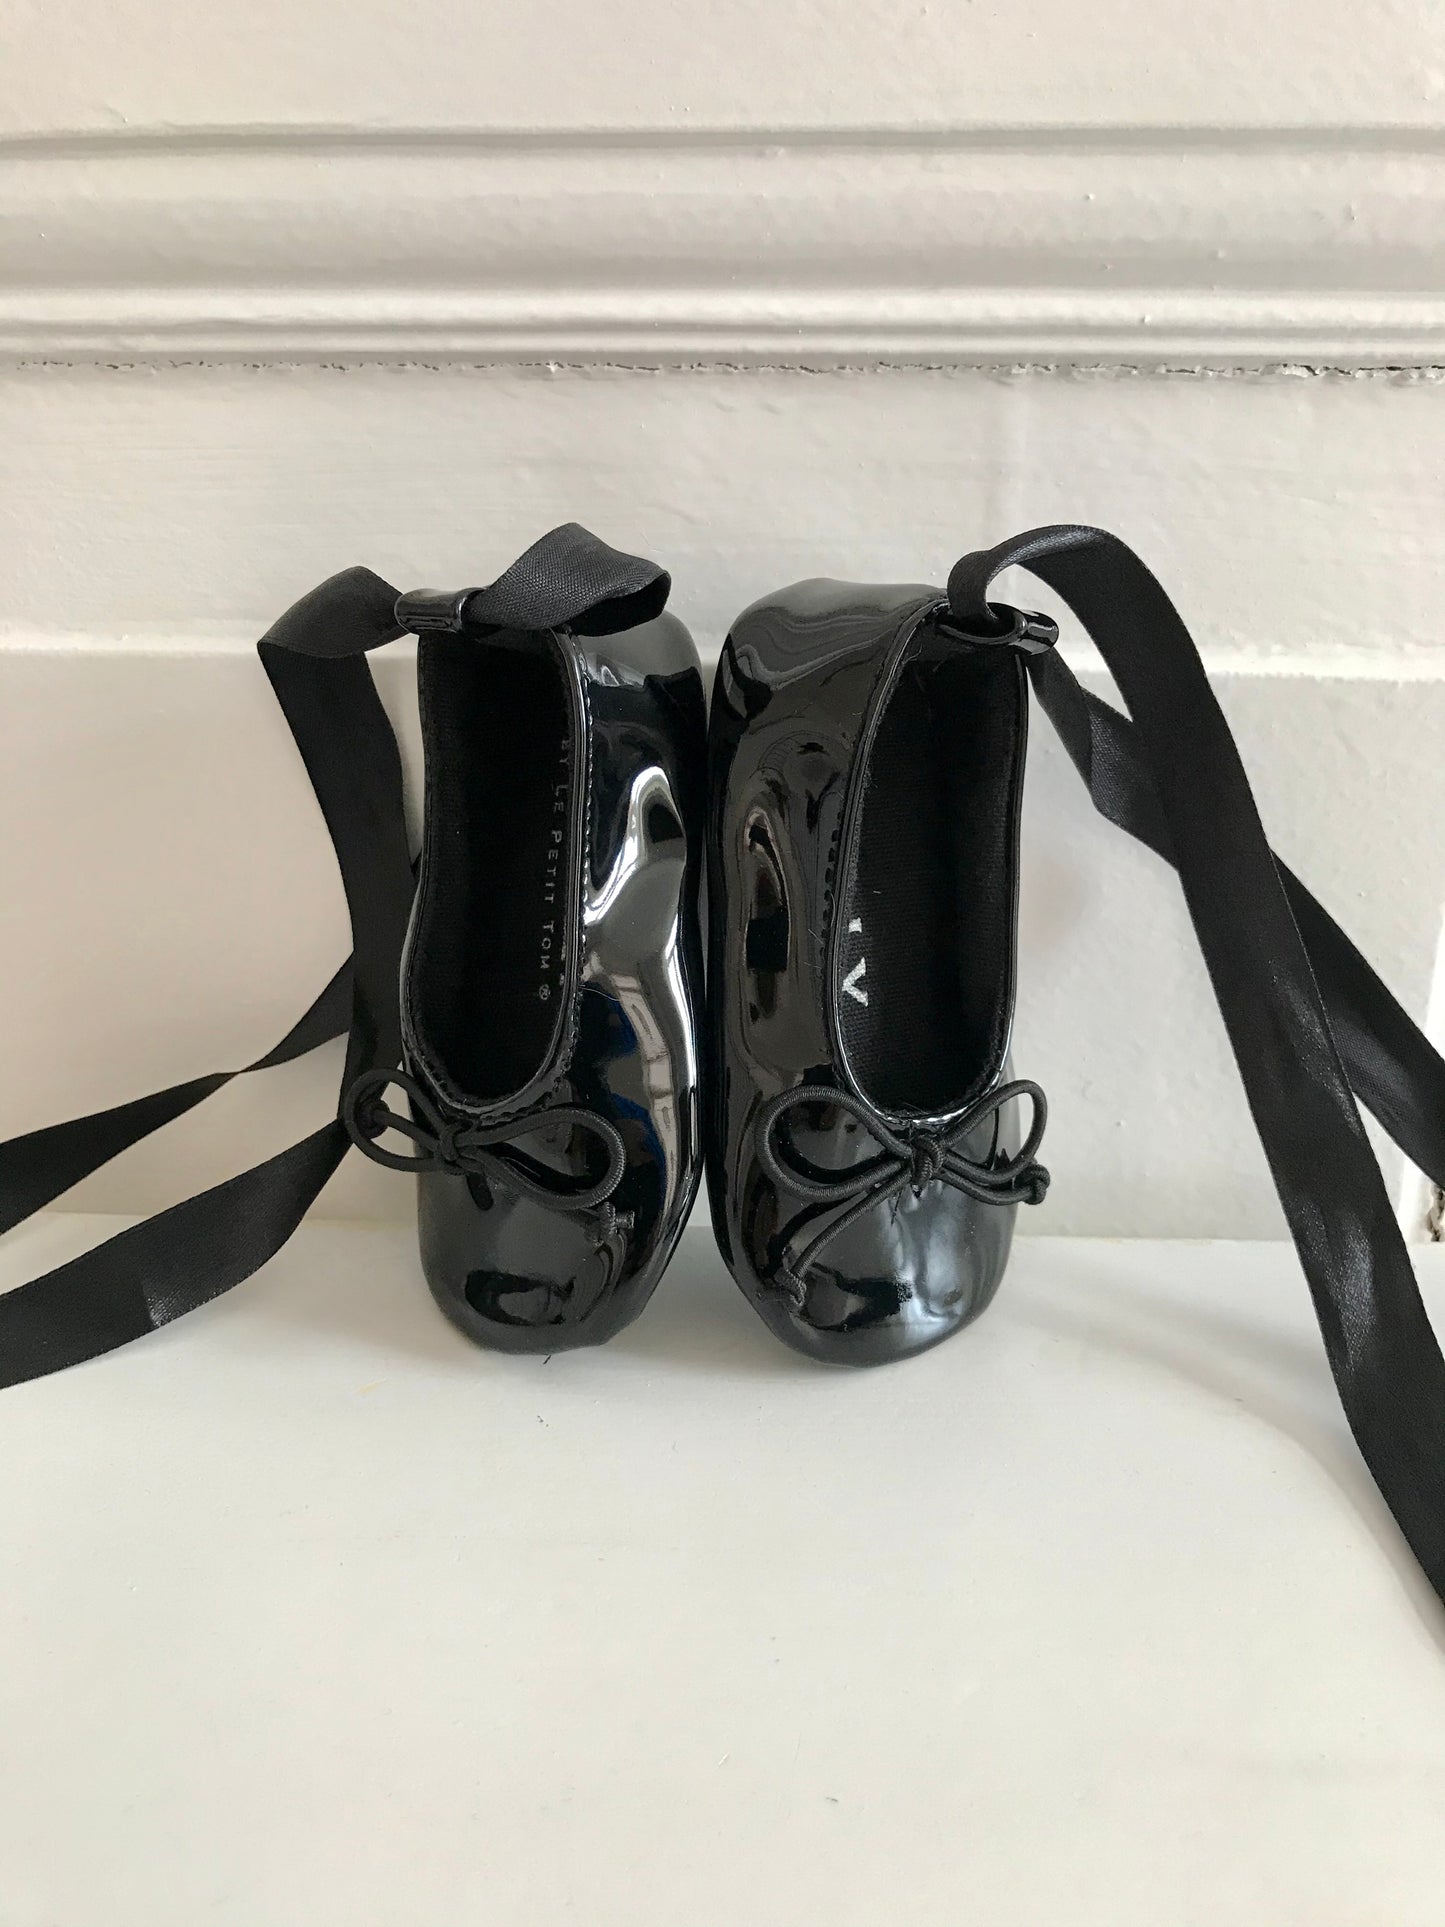 DOLLY by Le Petit Tom ® BABY BALLERINAS WITH RIBBONS black